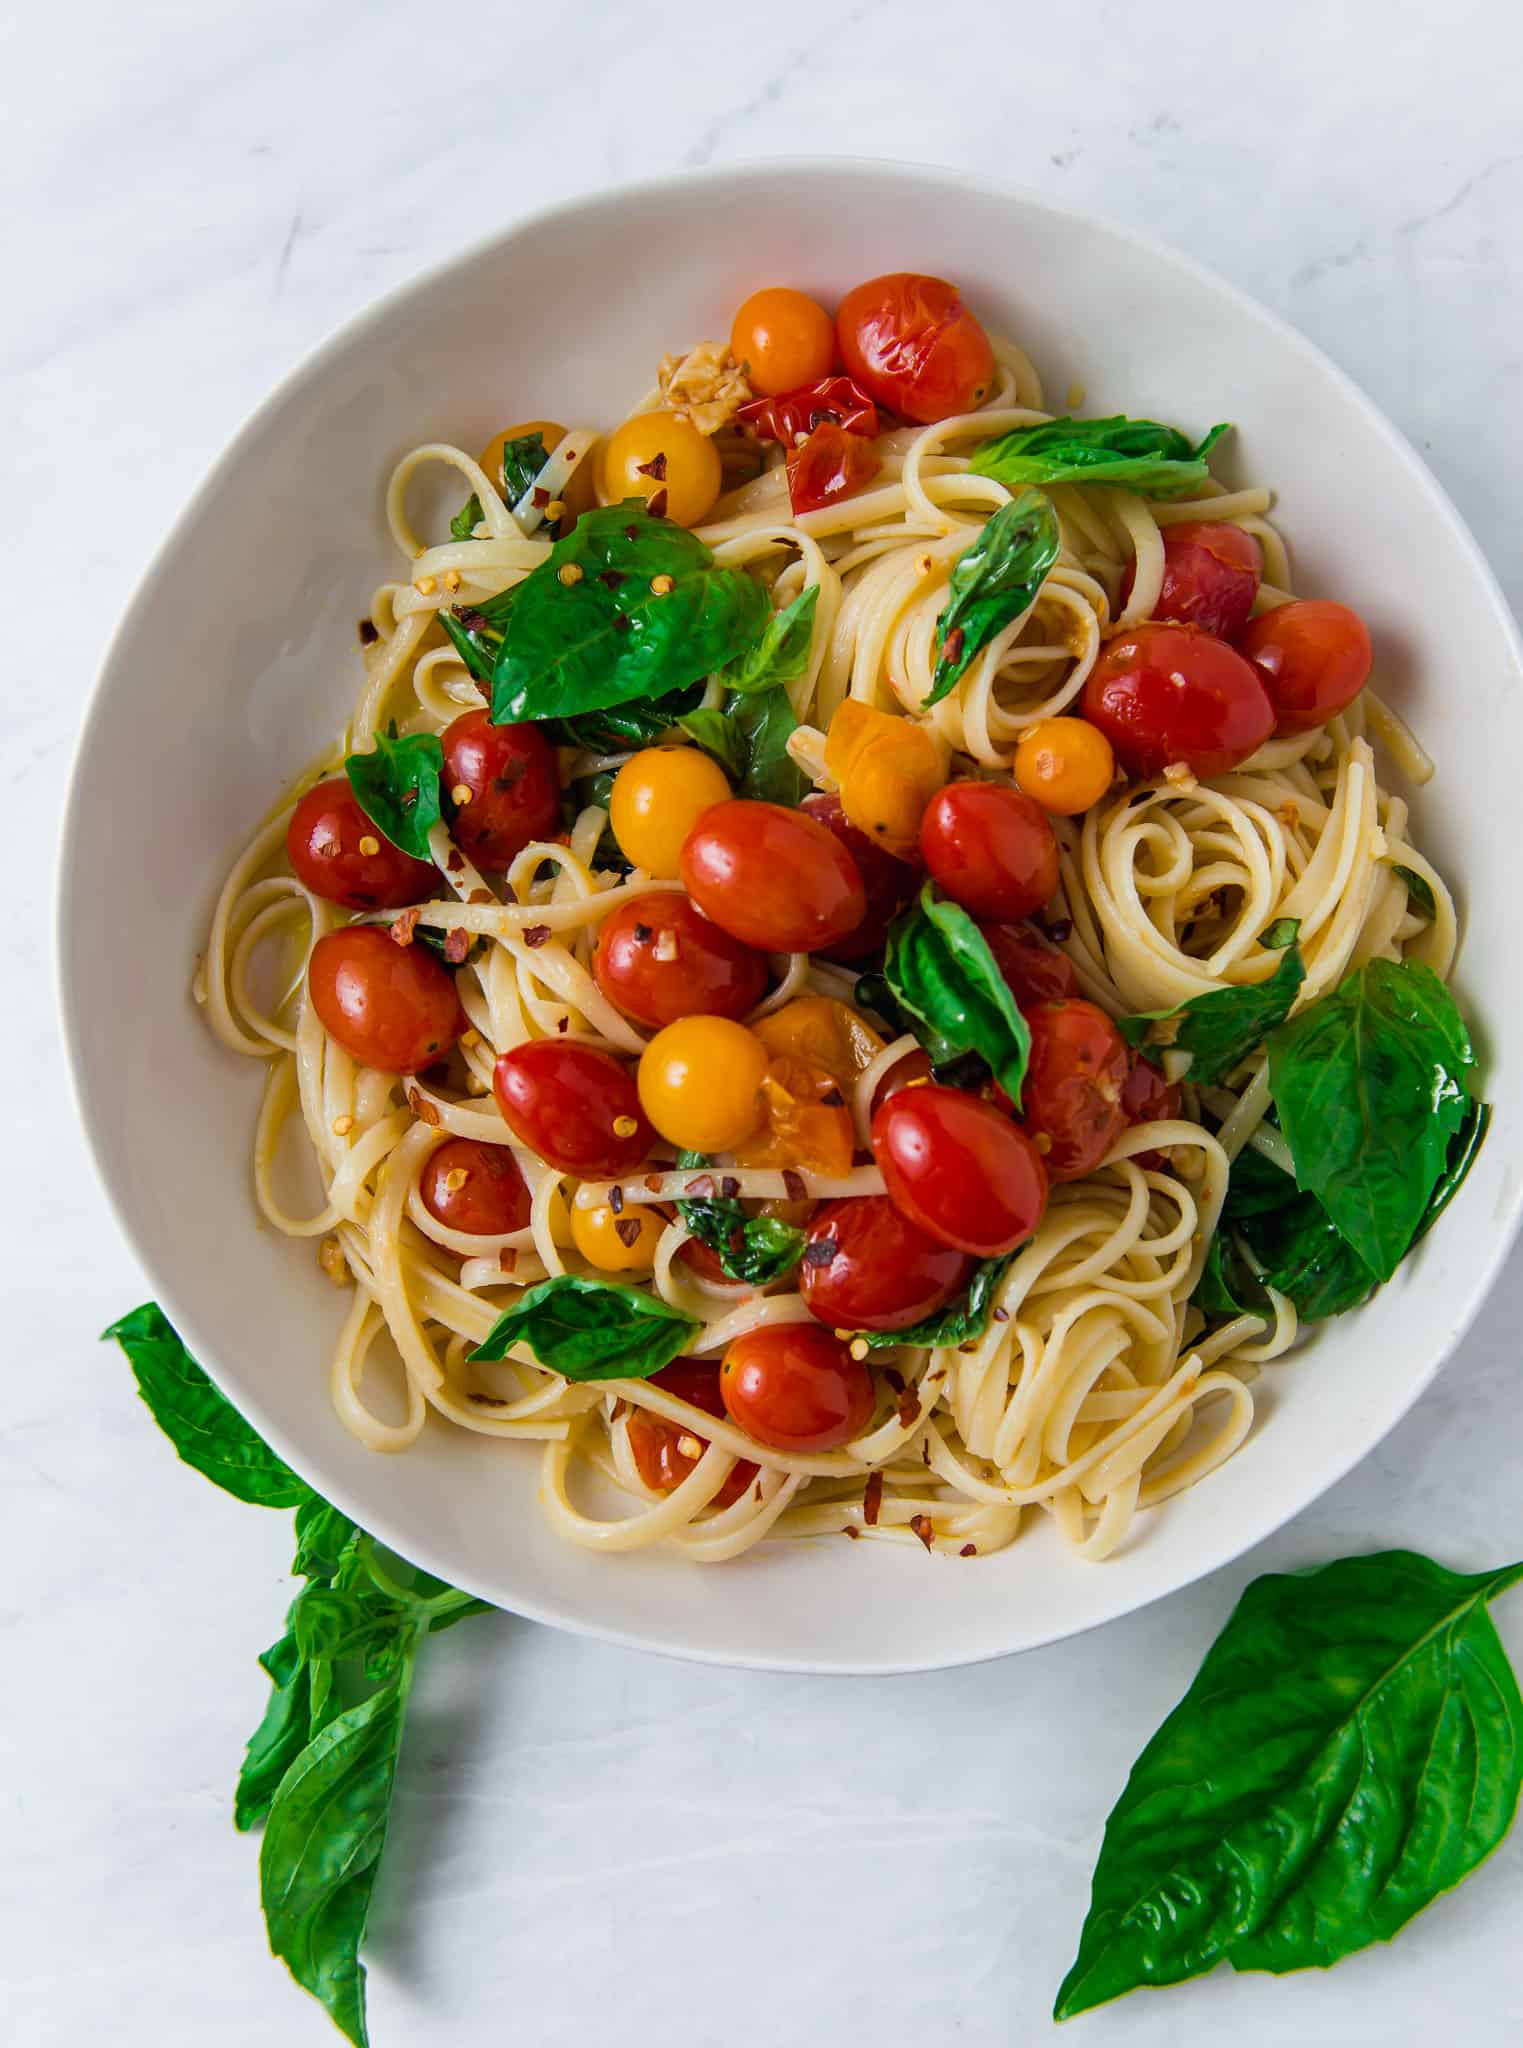 Pasta with cherry tomatoes, garlic, basil and red pepper flakes.